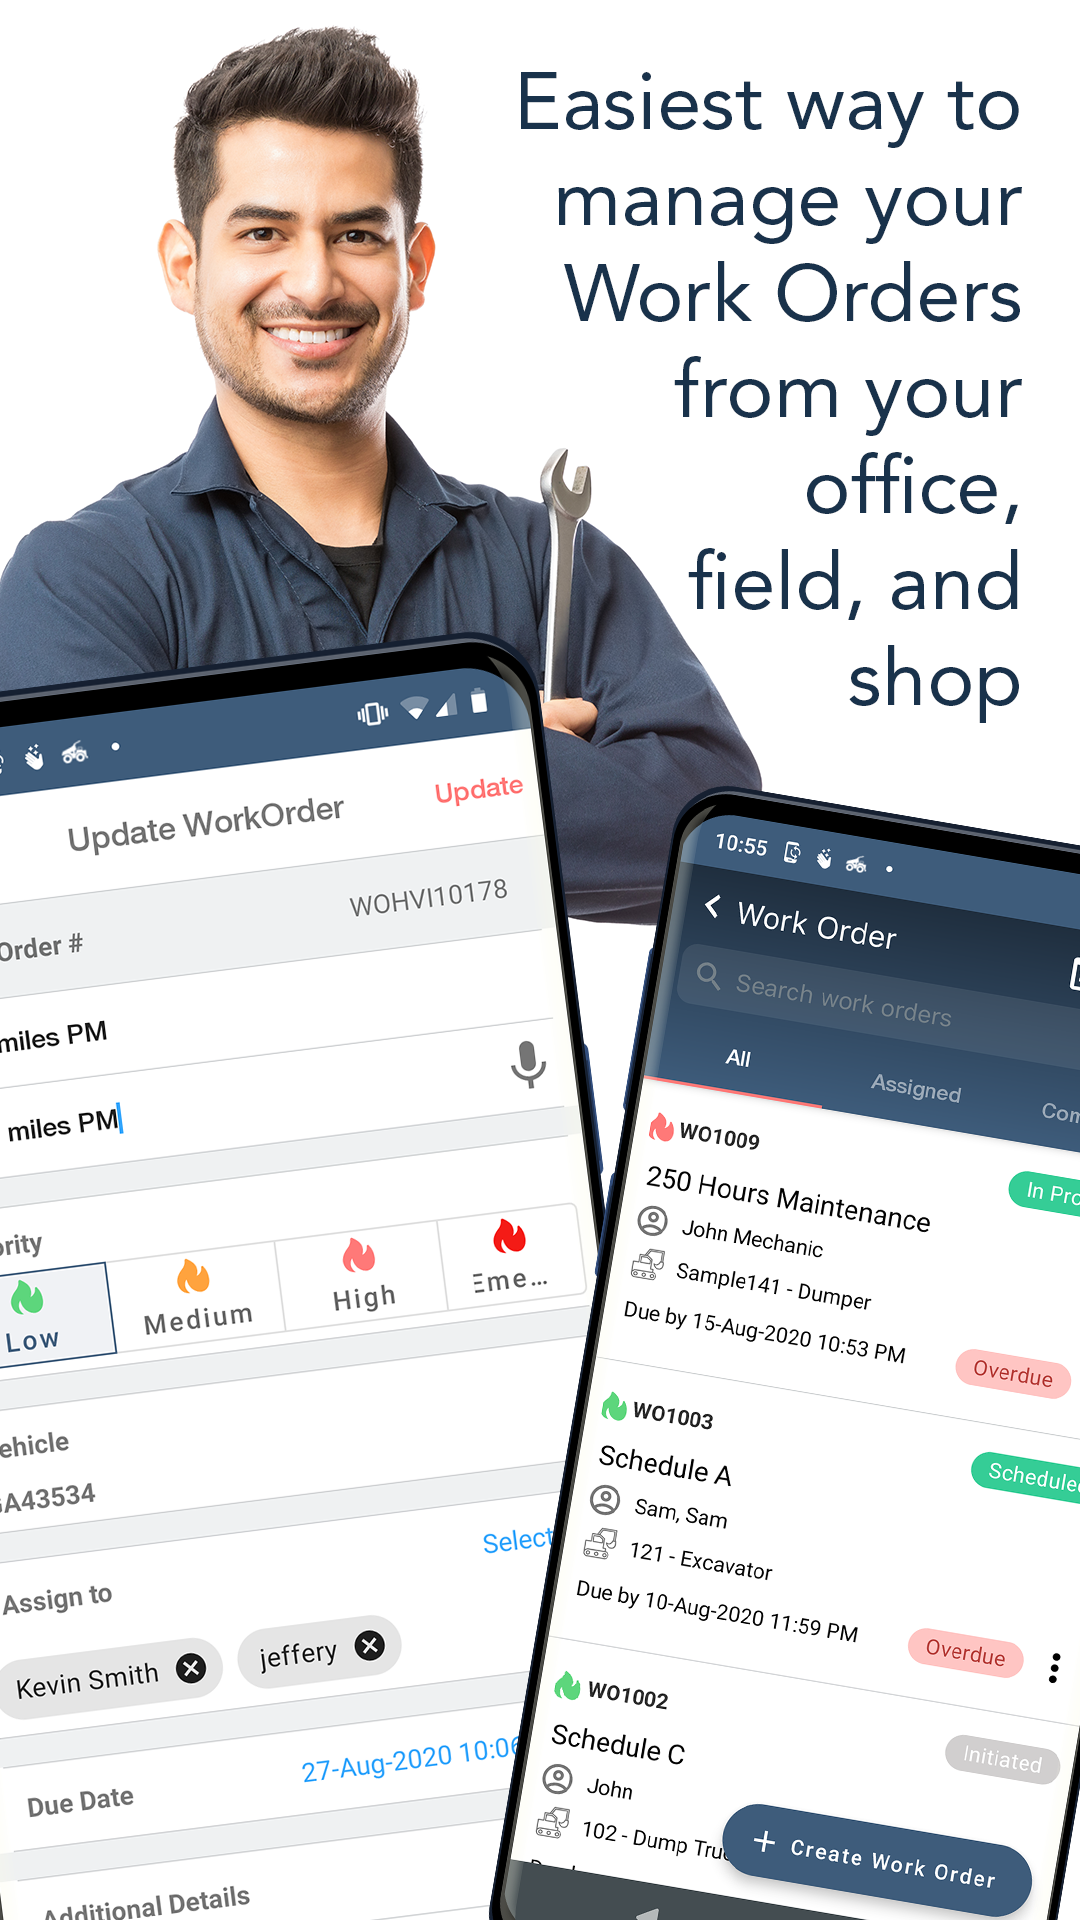 Easiest way to manage your work orders from your office, field and shop